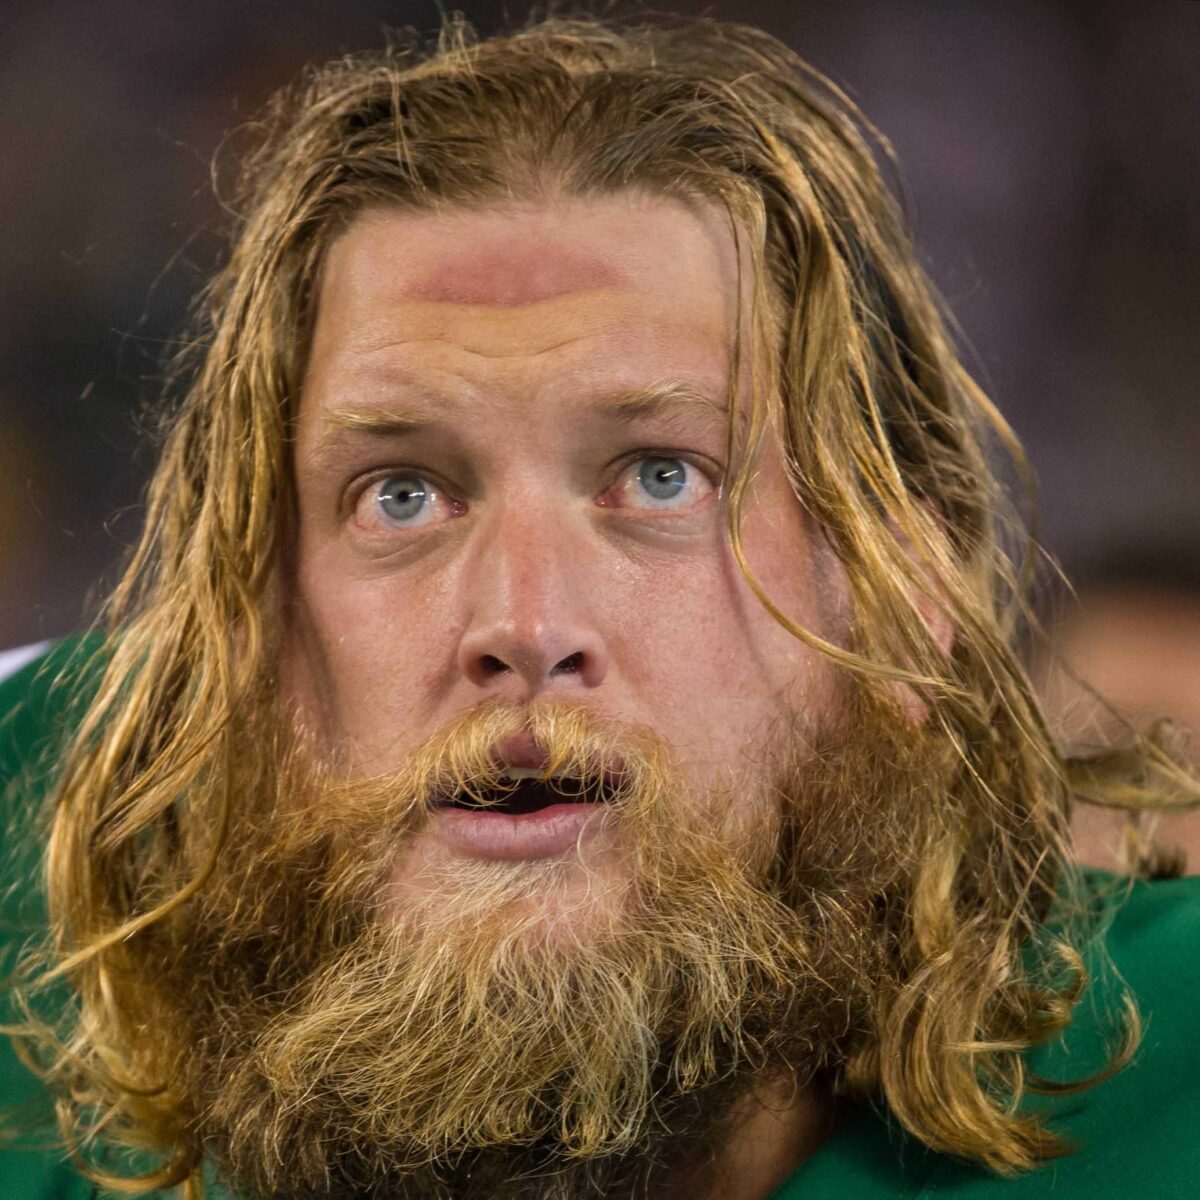 Former Ohio State offensive lineman Nick Mangold to go into Jets “ring of honor”